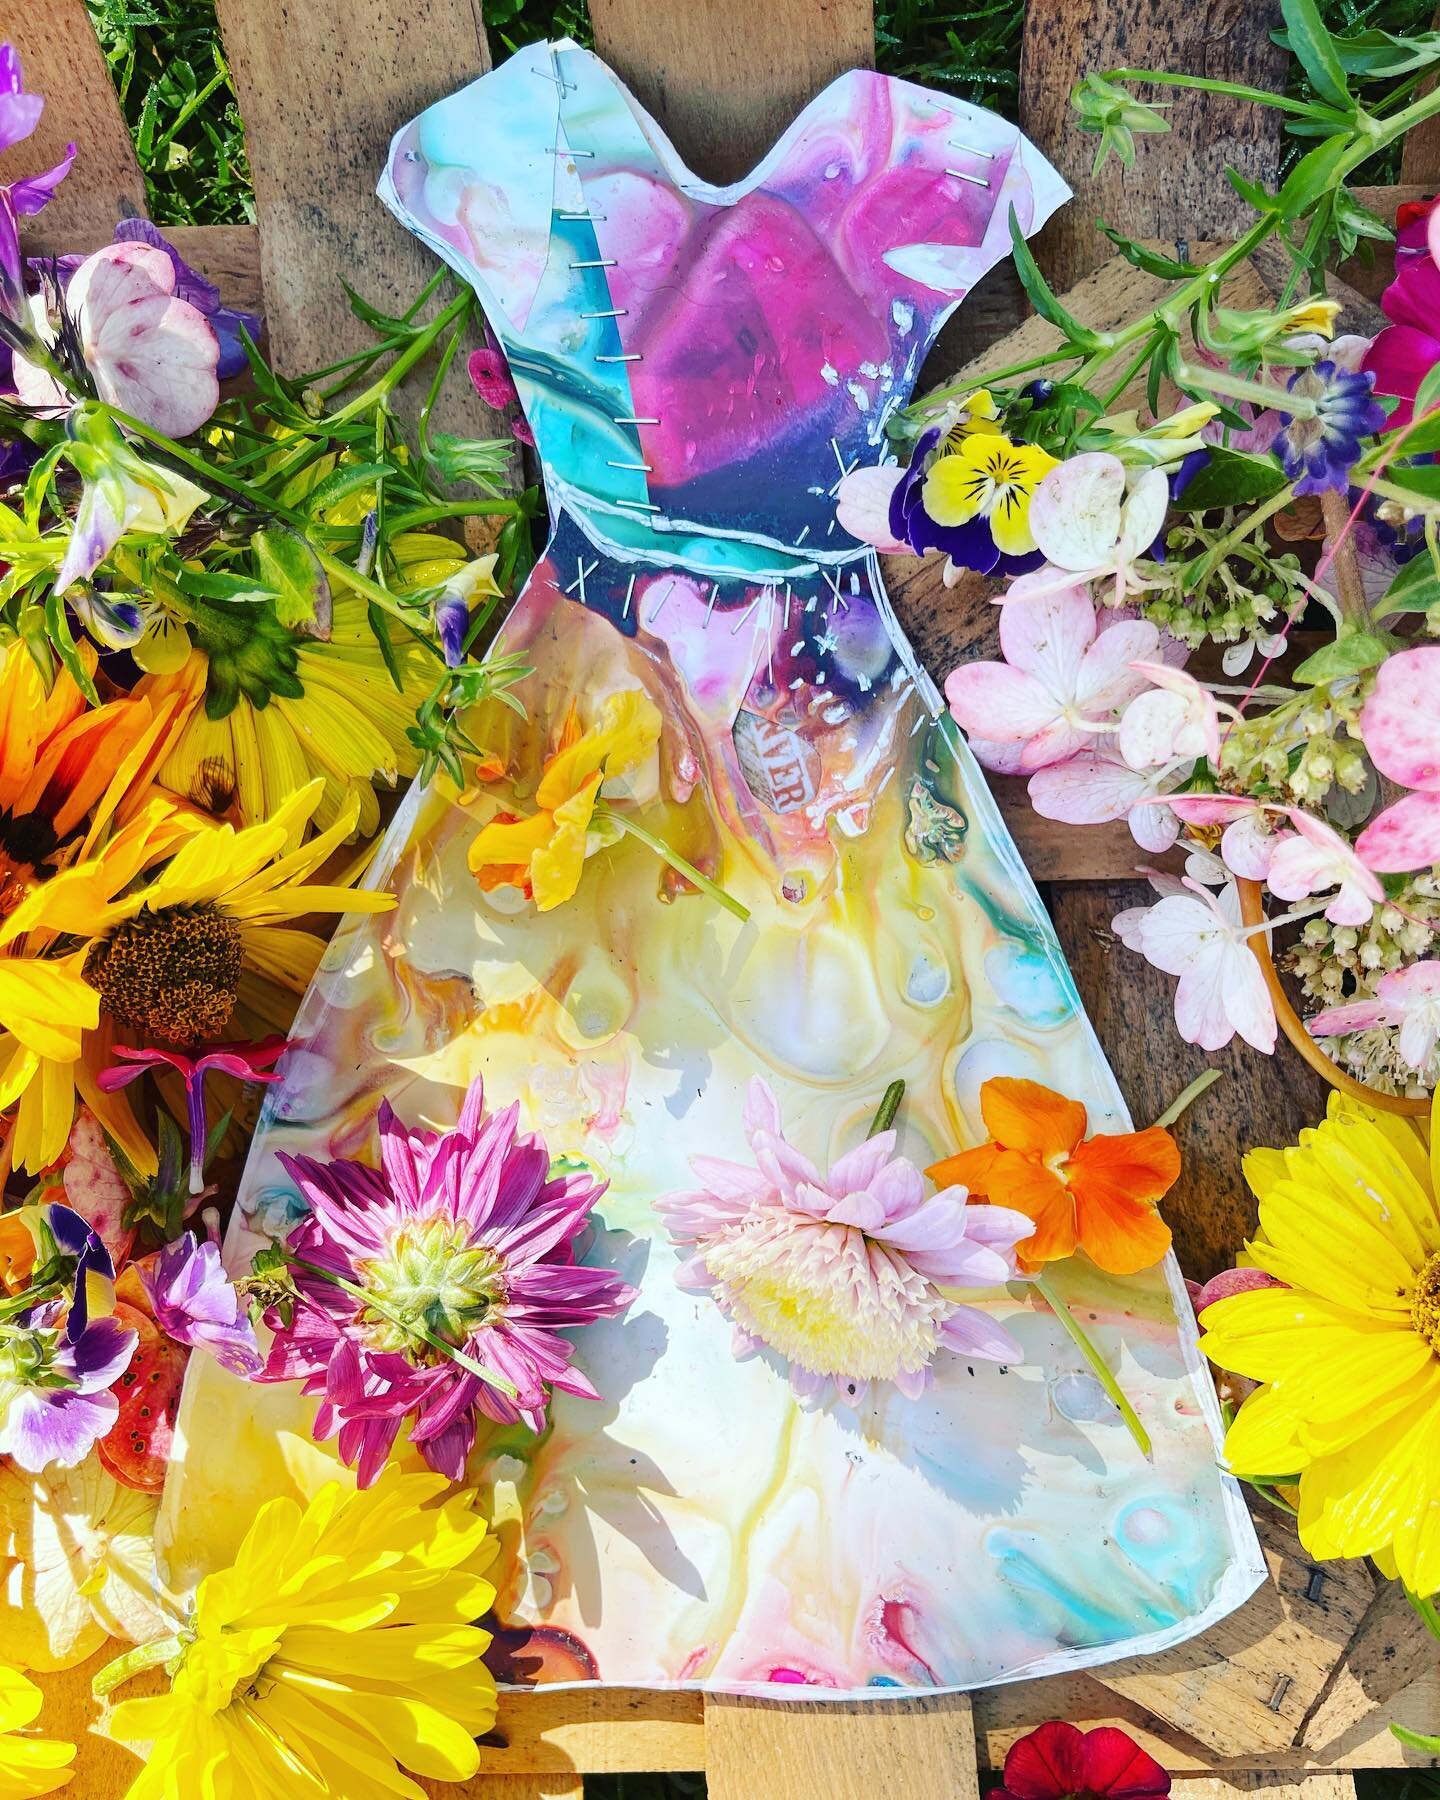 Laying the dress amongst the flowers, almost losing sight of her. This is one place she didn&rsquo;t mind blending in. 
.
.
.
.
.
#thursdaydress #thursdaydresses #herdressstory #herstory #flowerdress #365artdresses  #365artdressproject #creativedress